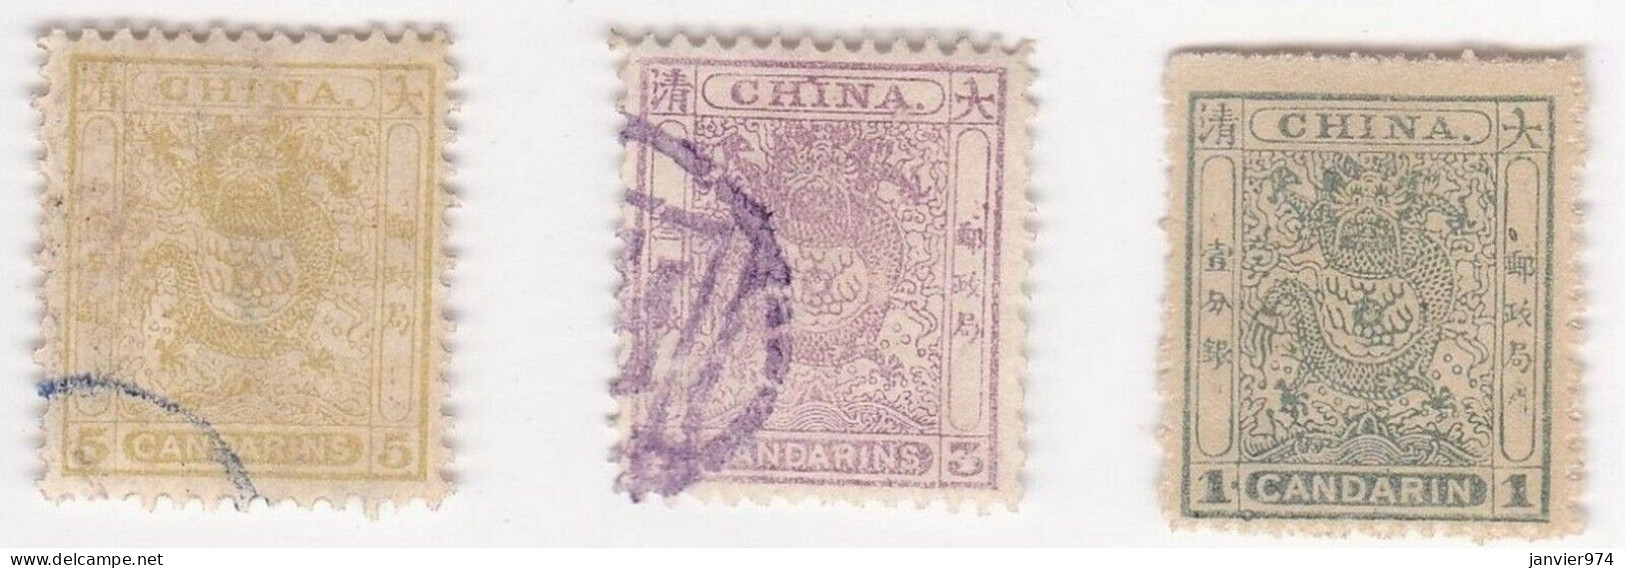 Chine Empire 1878, 3 Timbres 1 Candarin, 3 Candarins Et 5 Candarins, Large Dragon , Scan Recto Verso  - Used Stamps